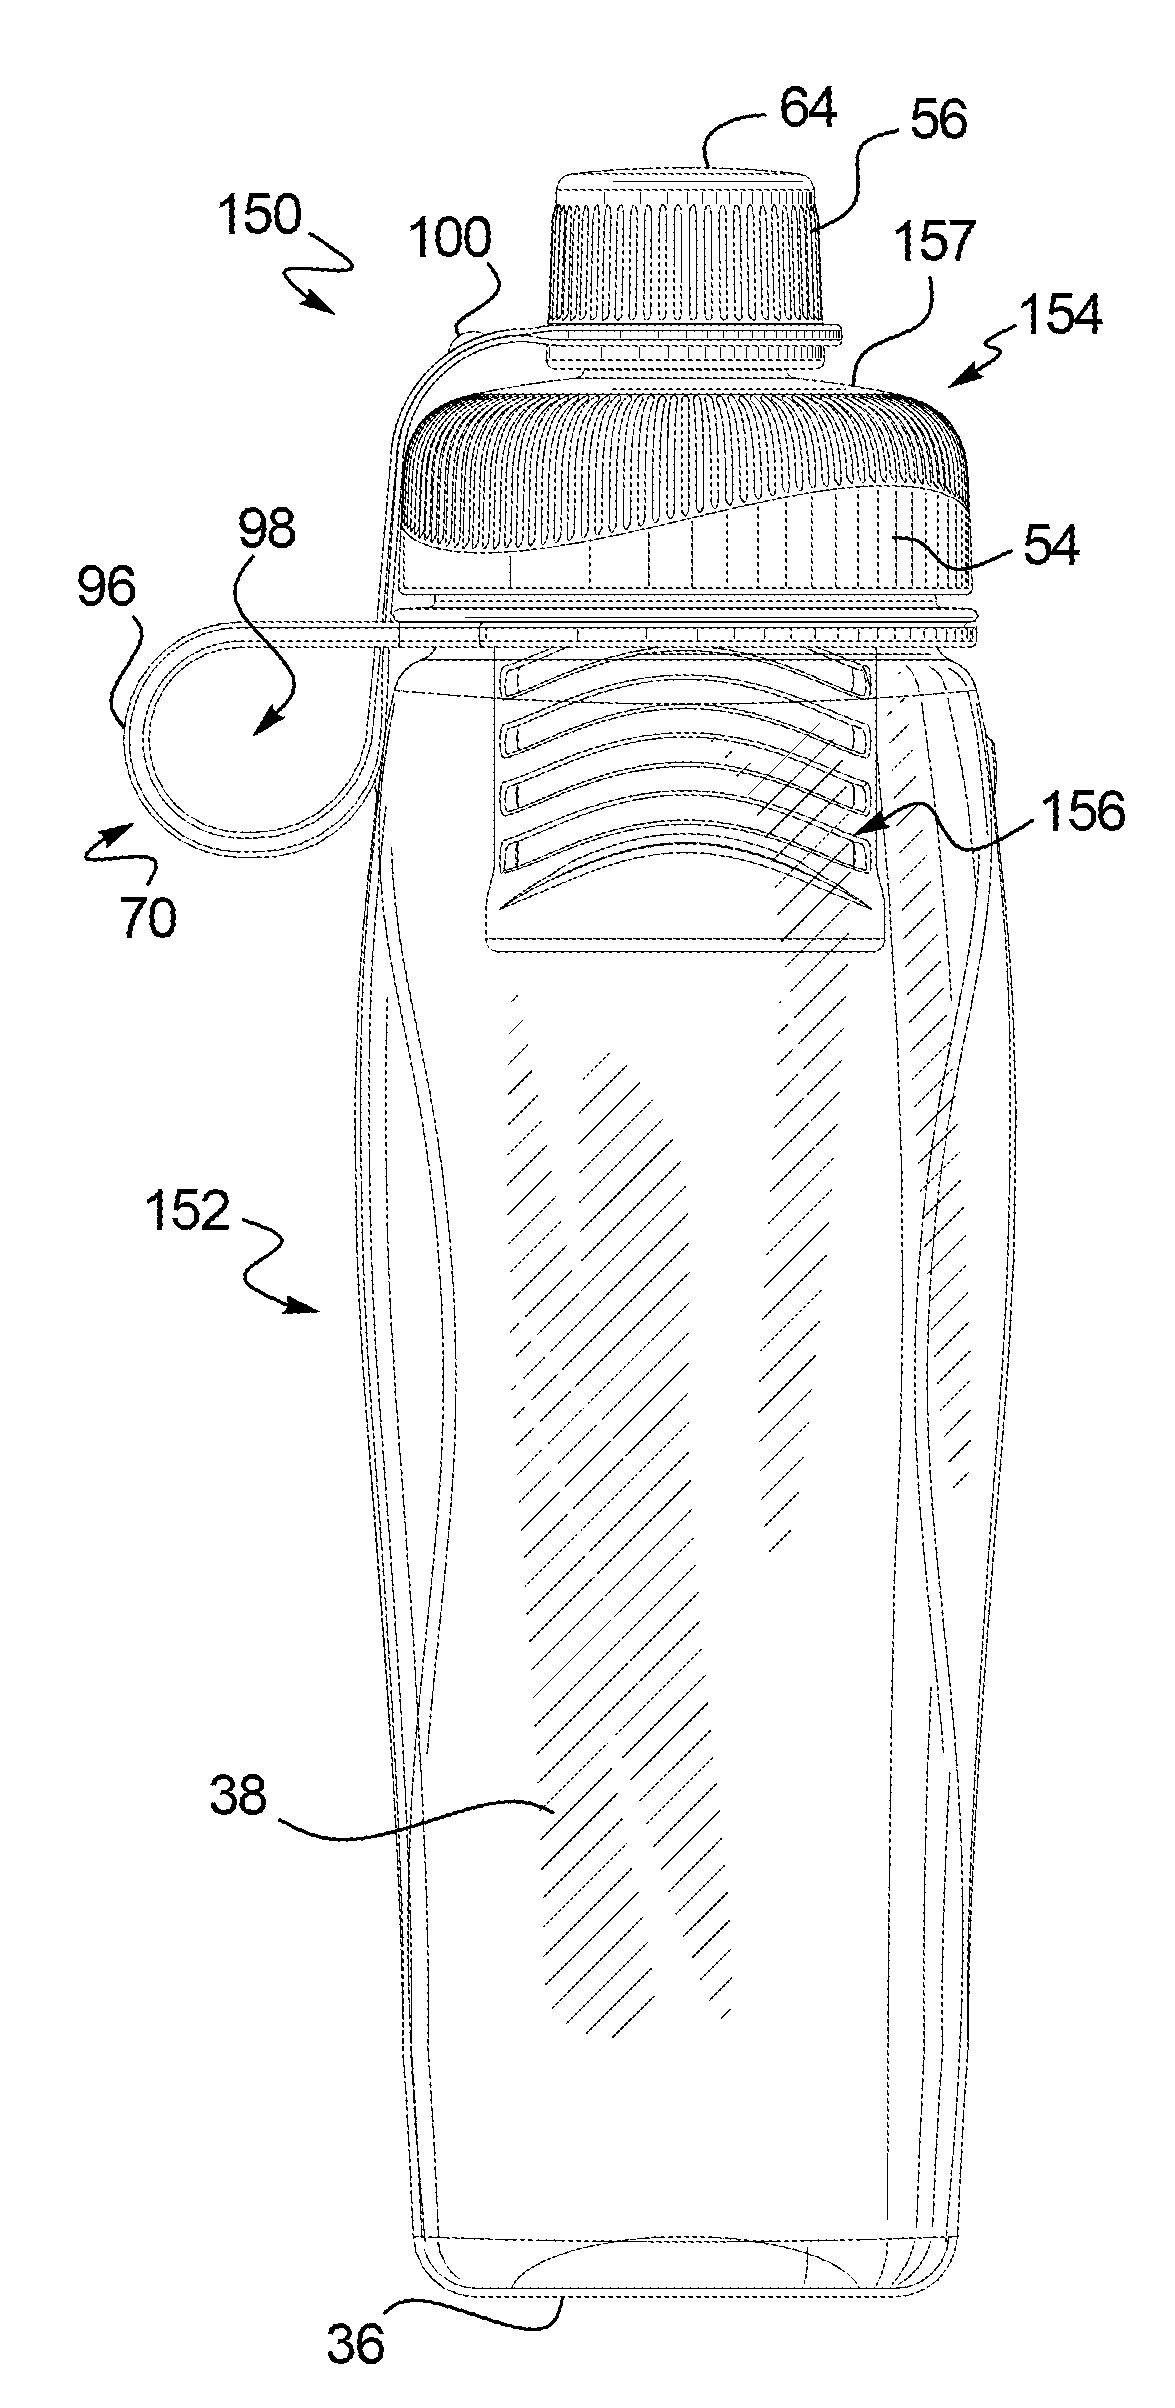 Drinking Container and Filter Assembly